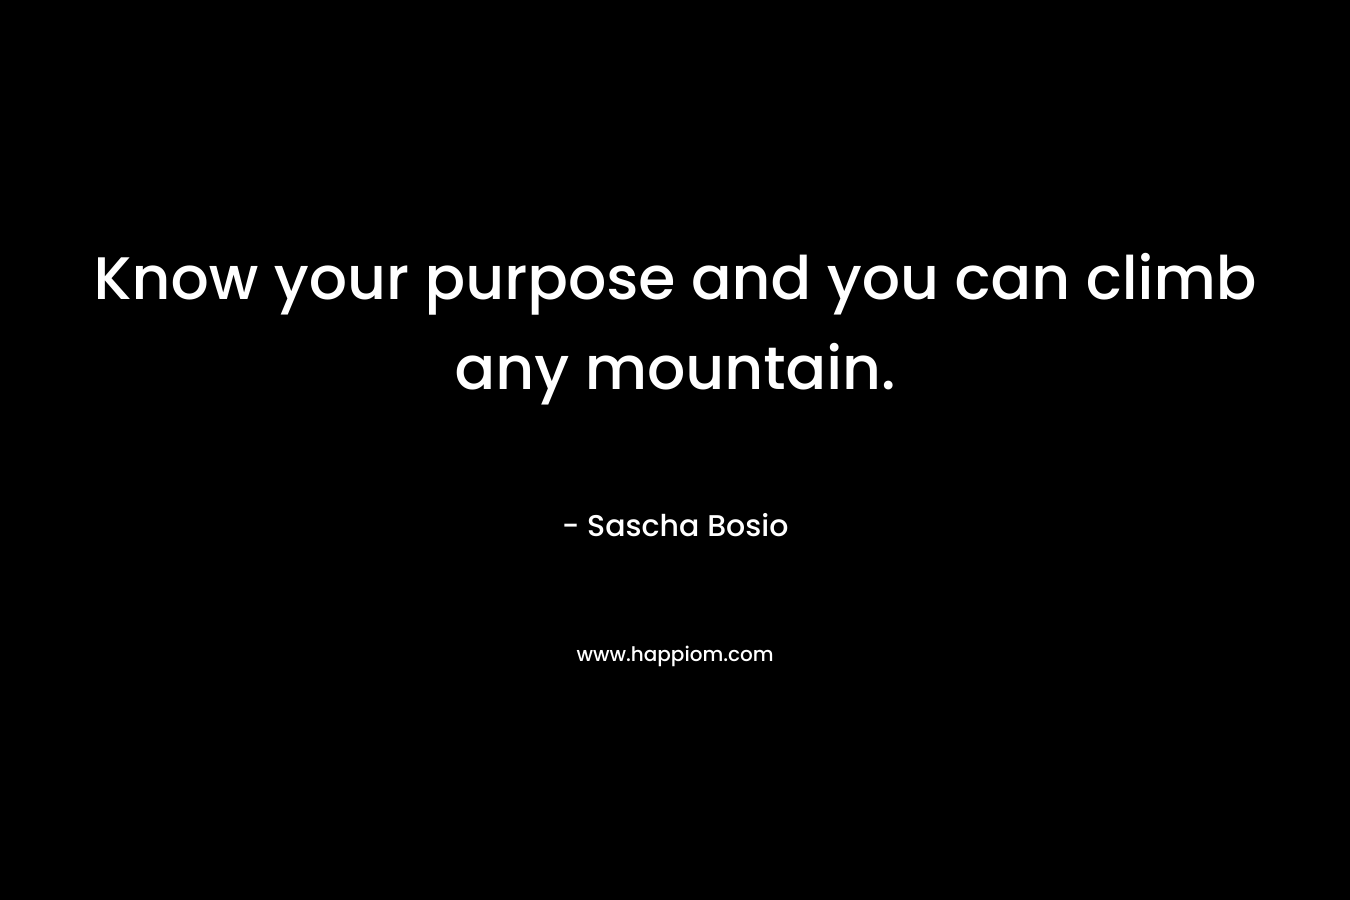 Know your purpose and you can climb any mountain.